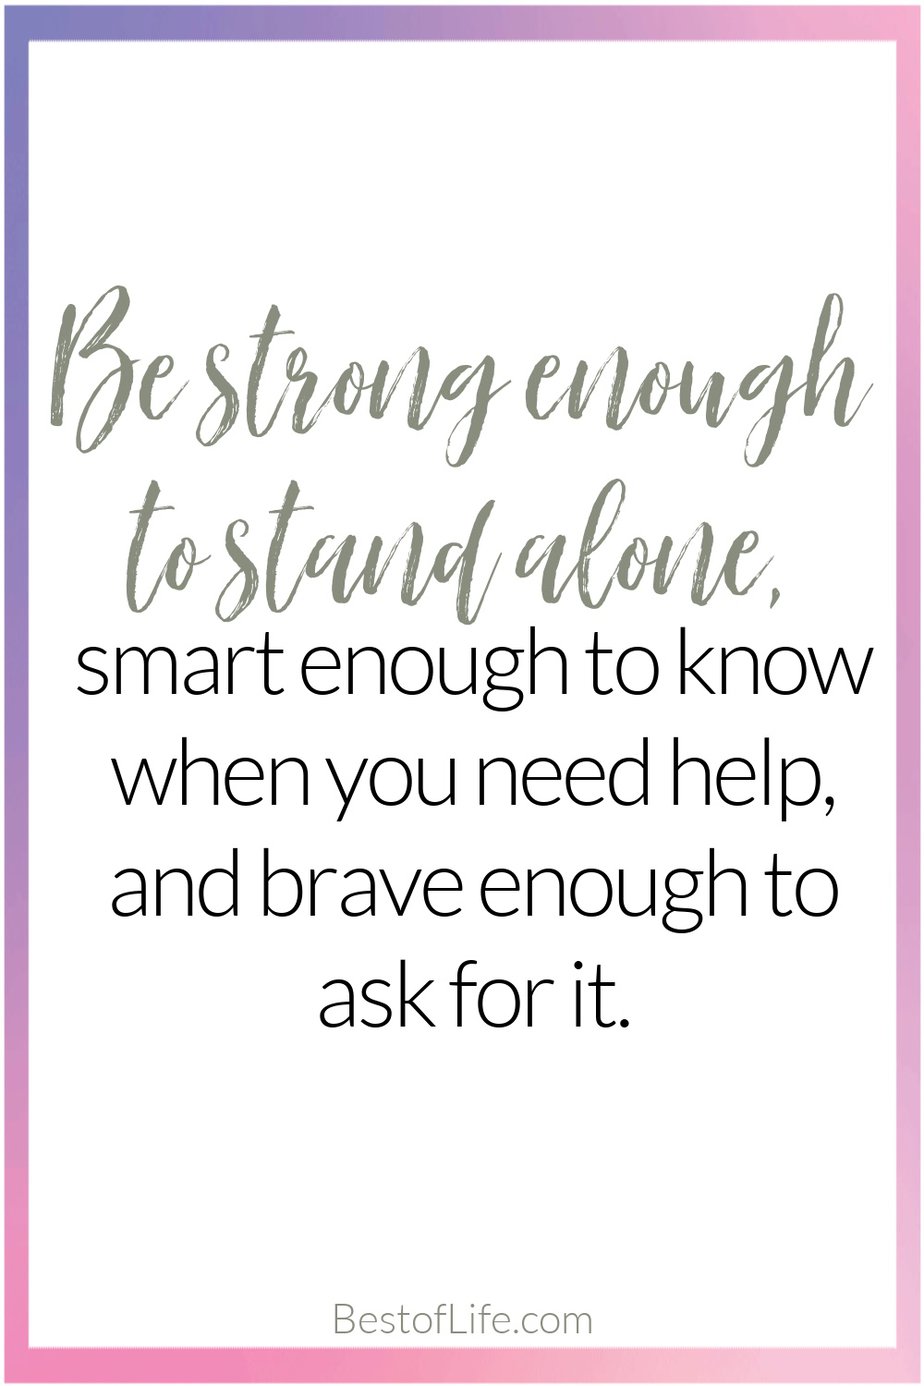 Quotes for Girls Rooms "Be strong enough to stand alone, smart enough to know when you need help, and brave enough to ask for it."